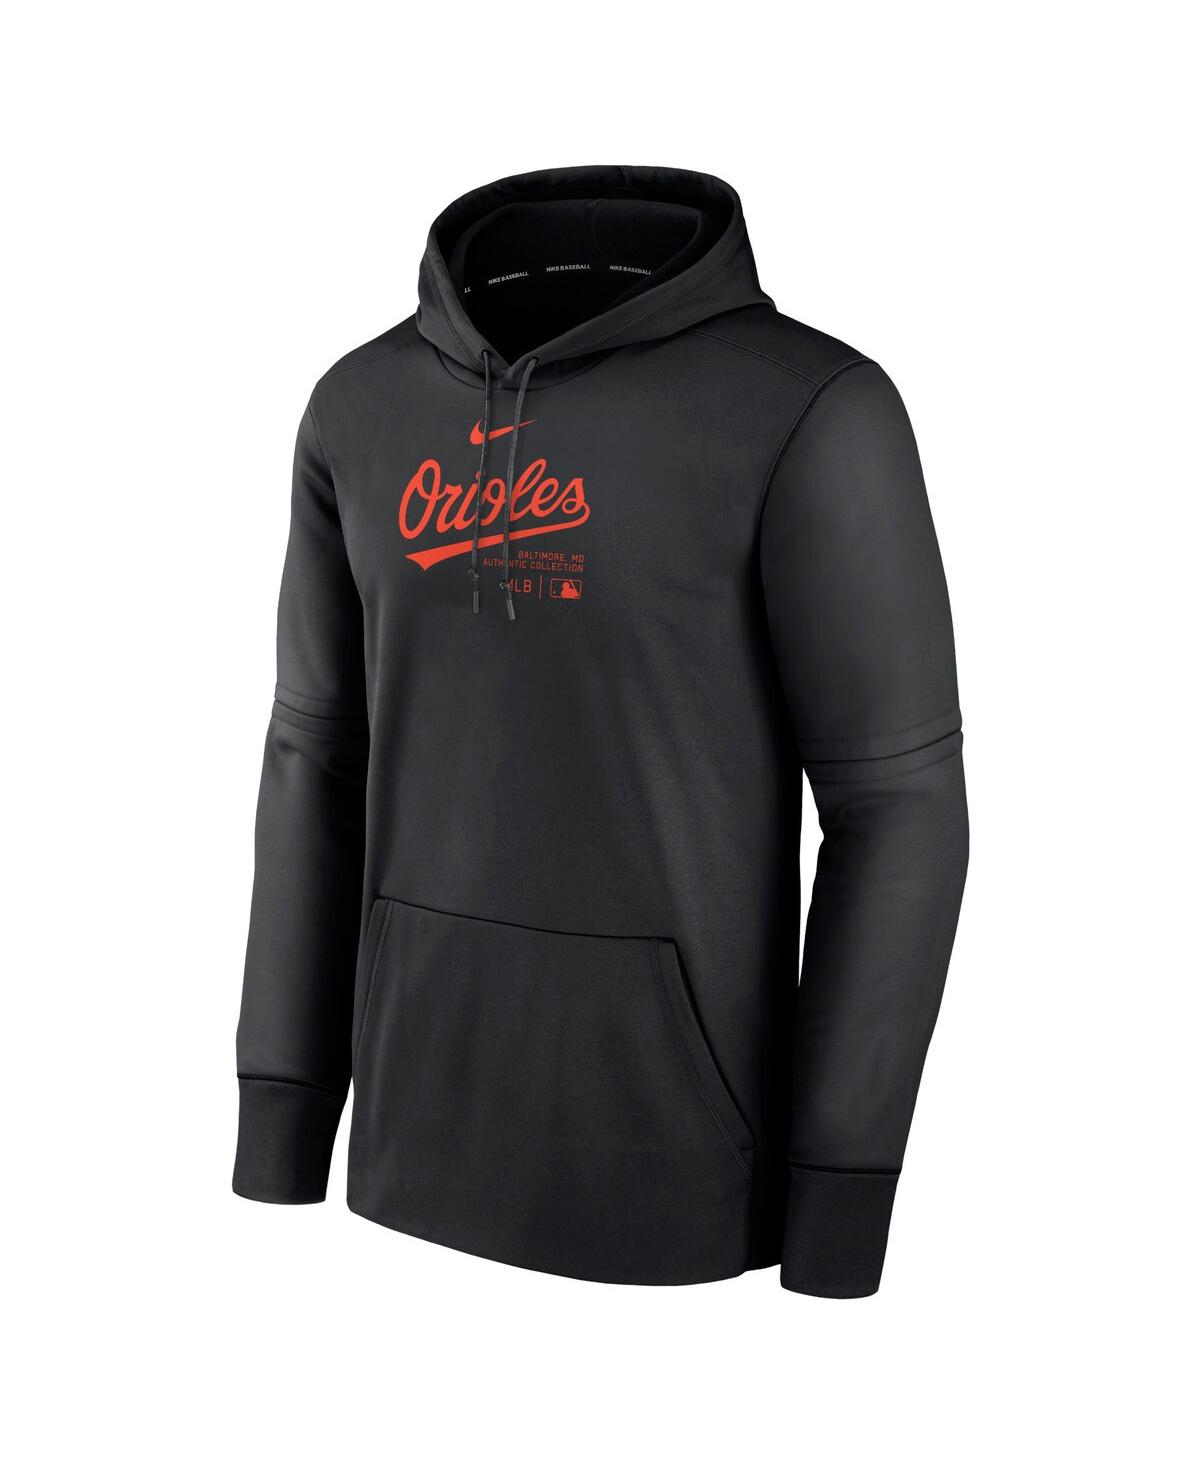 Shop Nike Men's  Black Baltimore Orioles Authentic Collection Practice Performance Pullover Hoodie